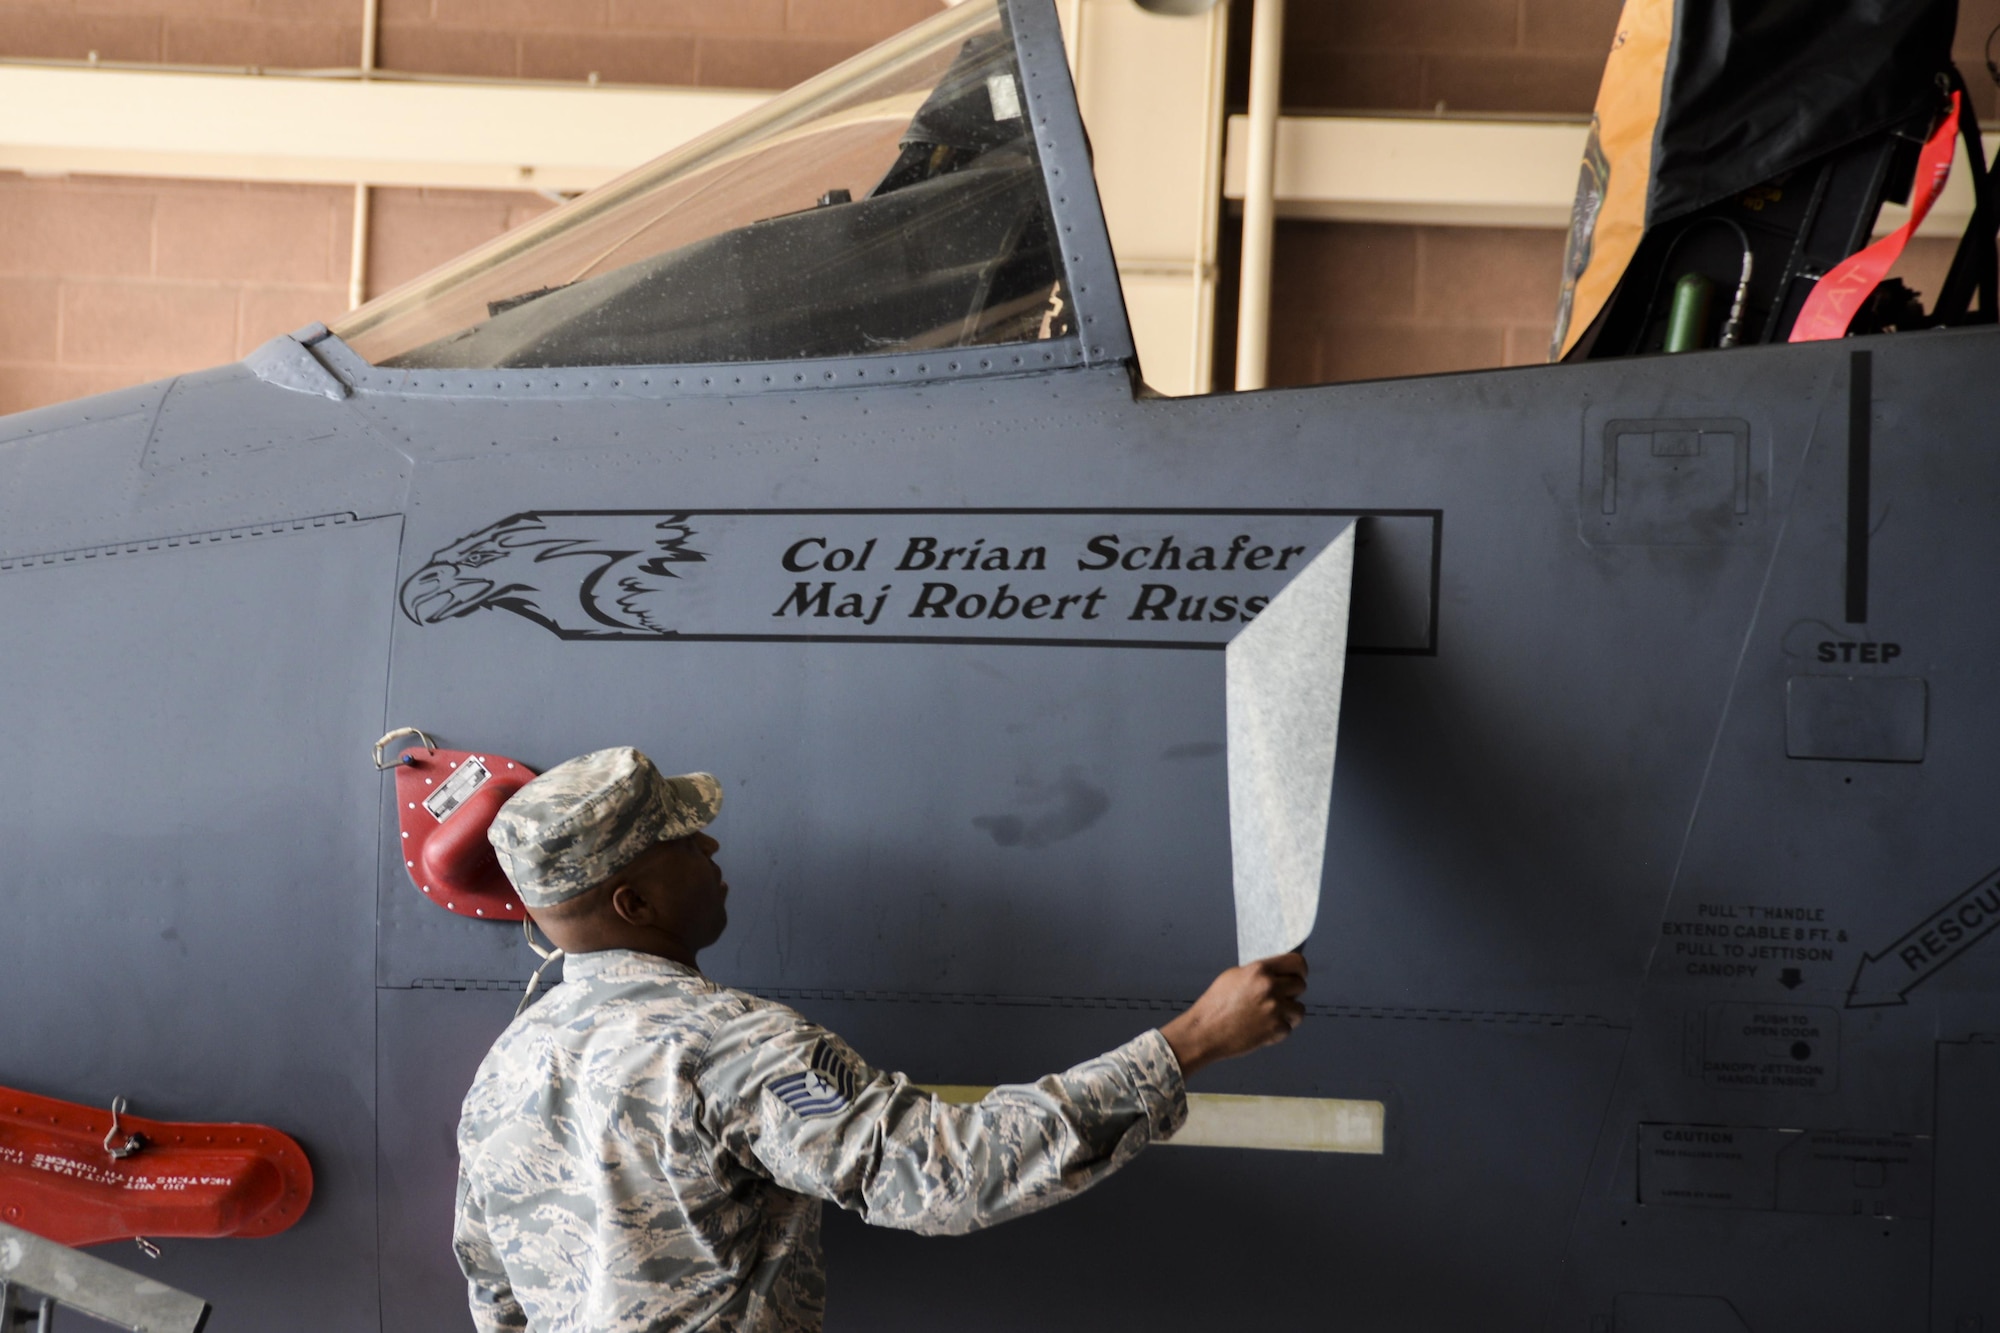 An Airman assigned to the 53rd Test and Evaluation Group reveals the name of the incoming 53rd TEG commander, Col. Brian Schafer, stenciled on the side of the group’s flagship, an F-15 Eagle, at Nellis Air Force Base, Nev., July 11, 2017. It is customary for the flagship of flying squadrons, groups or wings to bear its commander’s name. (U.S. Air Force photo by Airman 1st Class Andrew D. Sarver/Released)